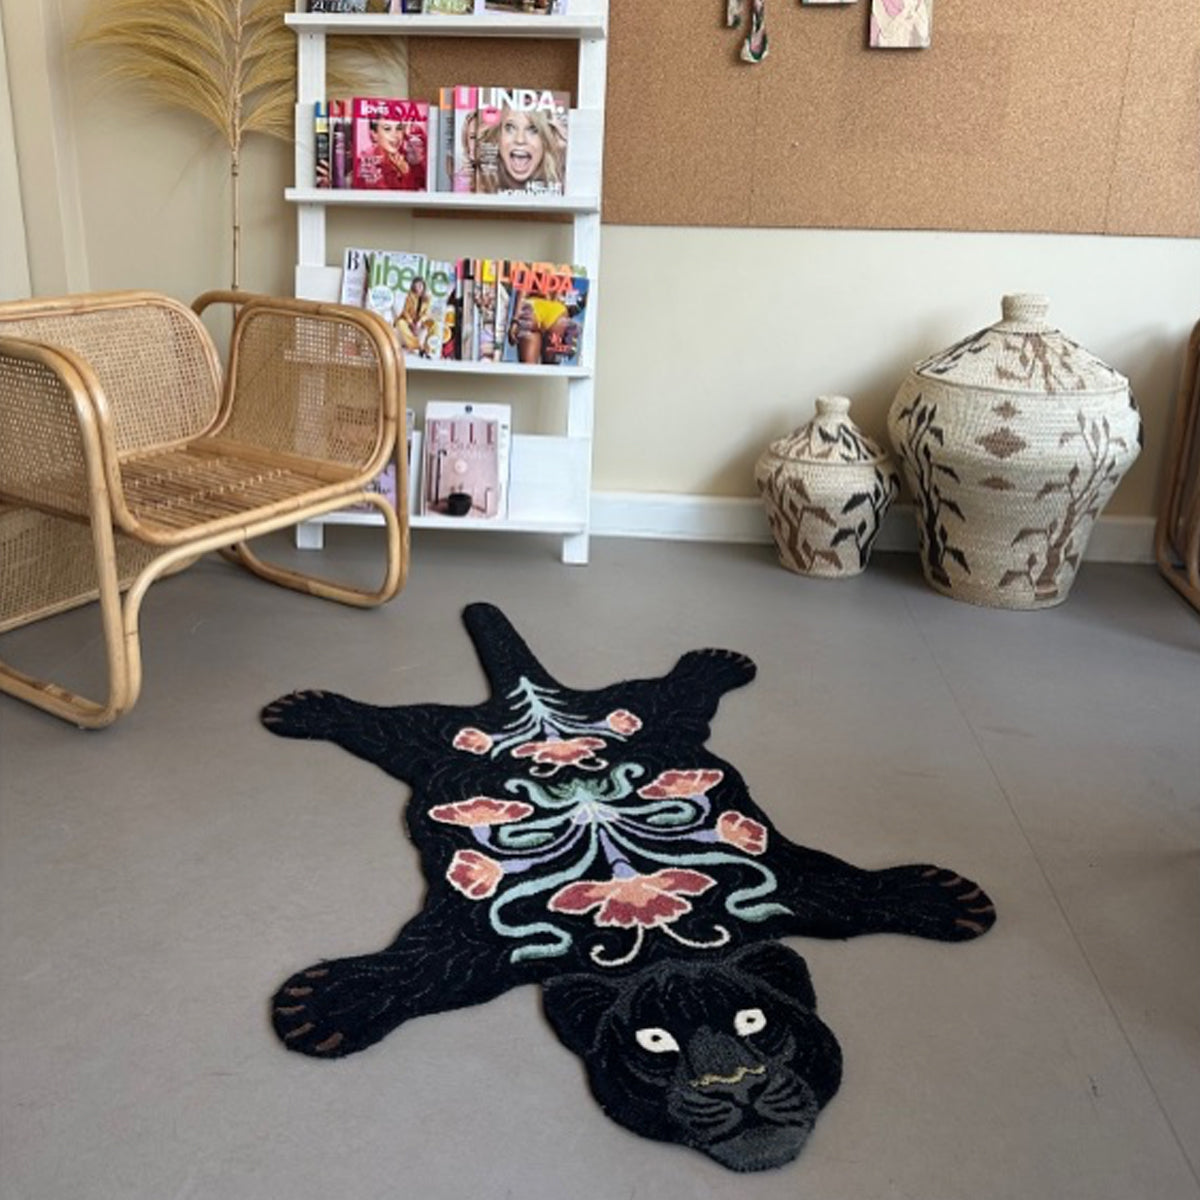 Flower Black Panther Rug - Courthouse Interiors X Doing Goods Exclusive